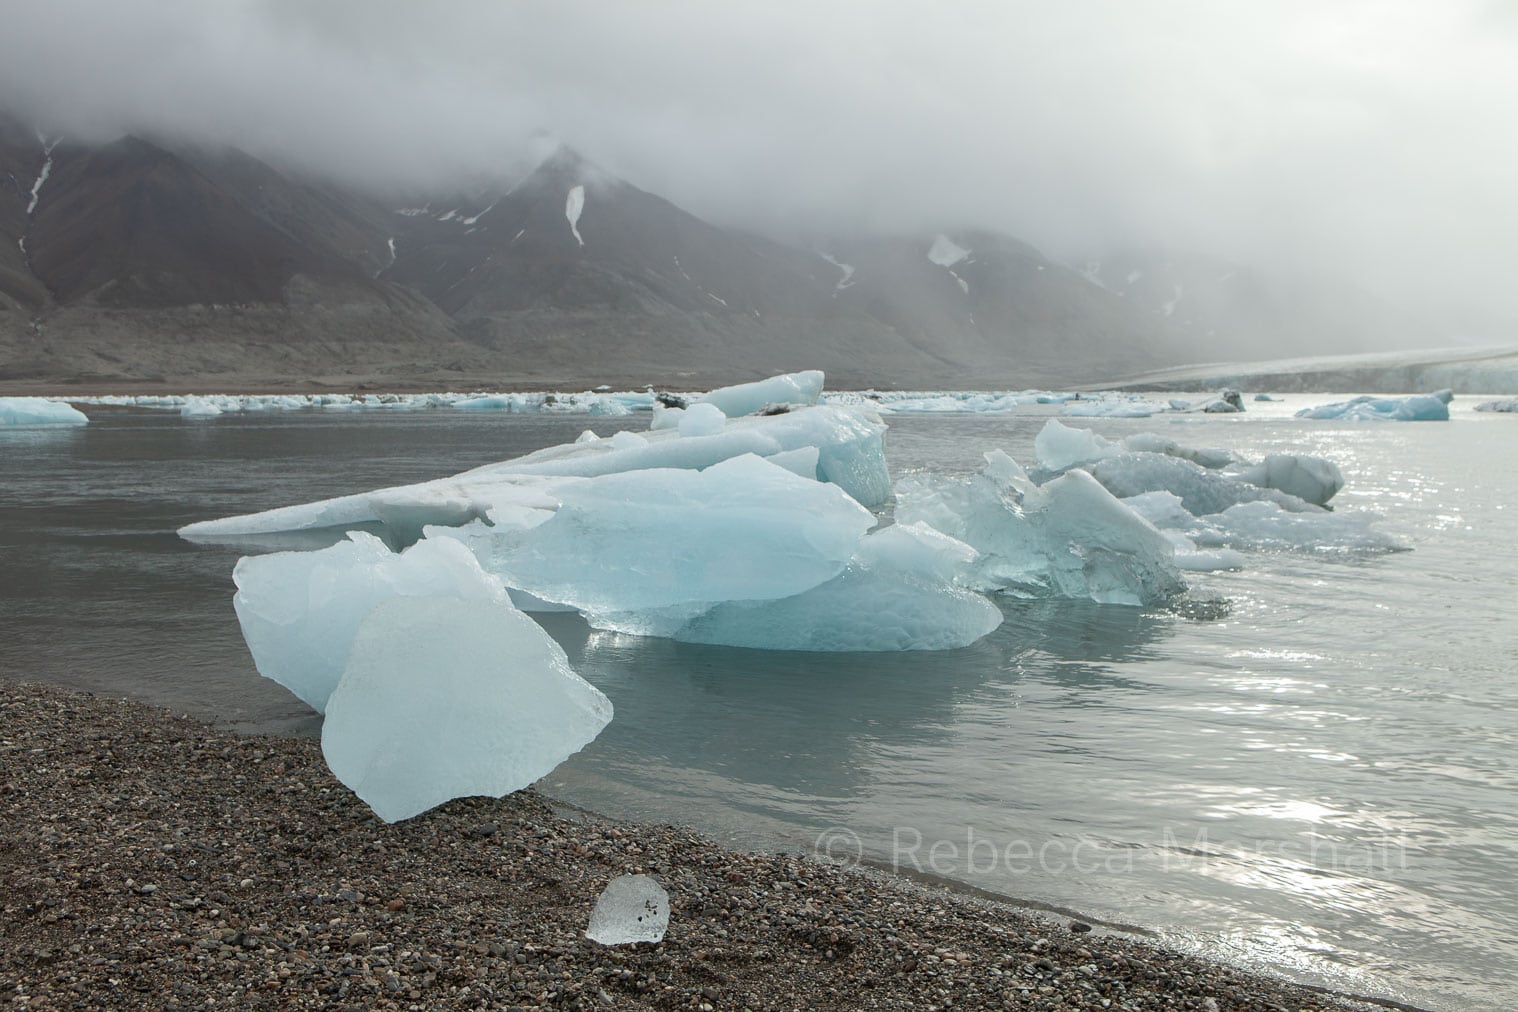 Photograph of icebergs in the sea in a misty, cold landscape